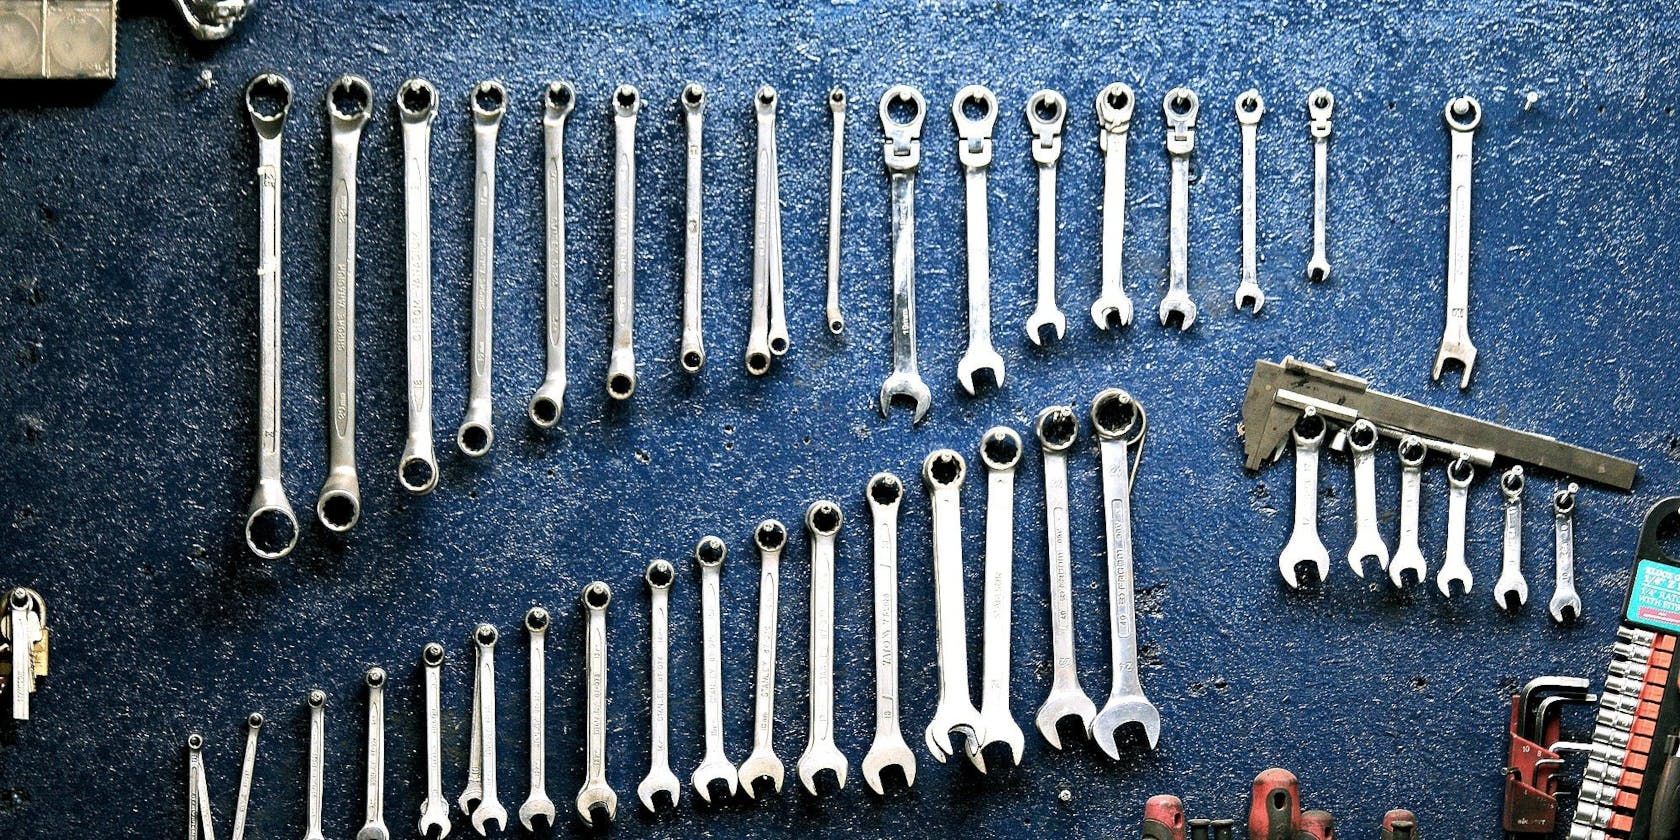 Different-sized wrenches hanging on a wall.